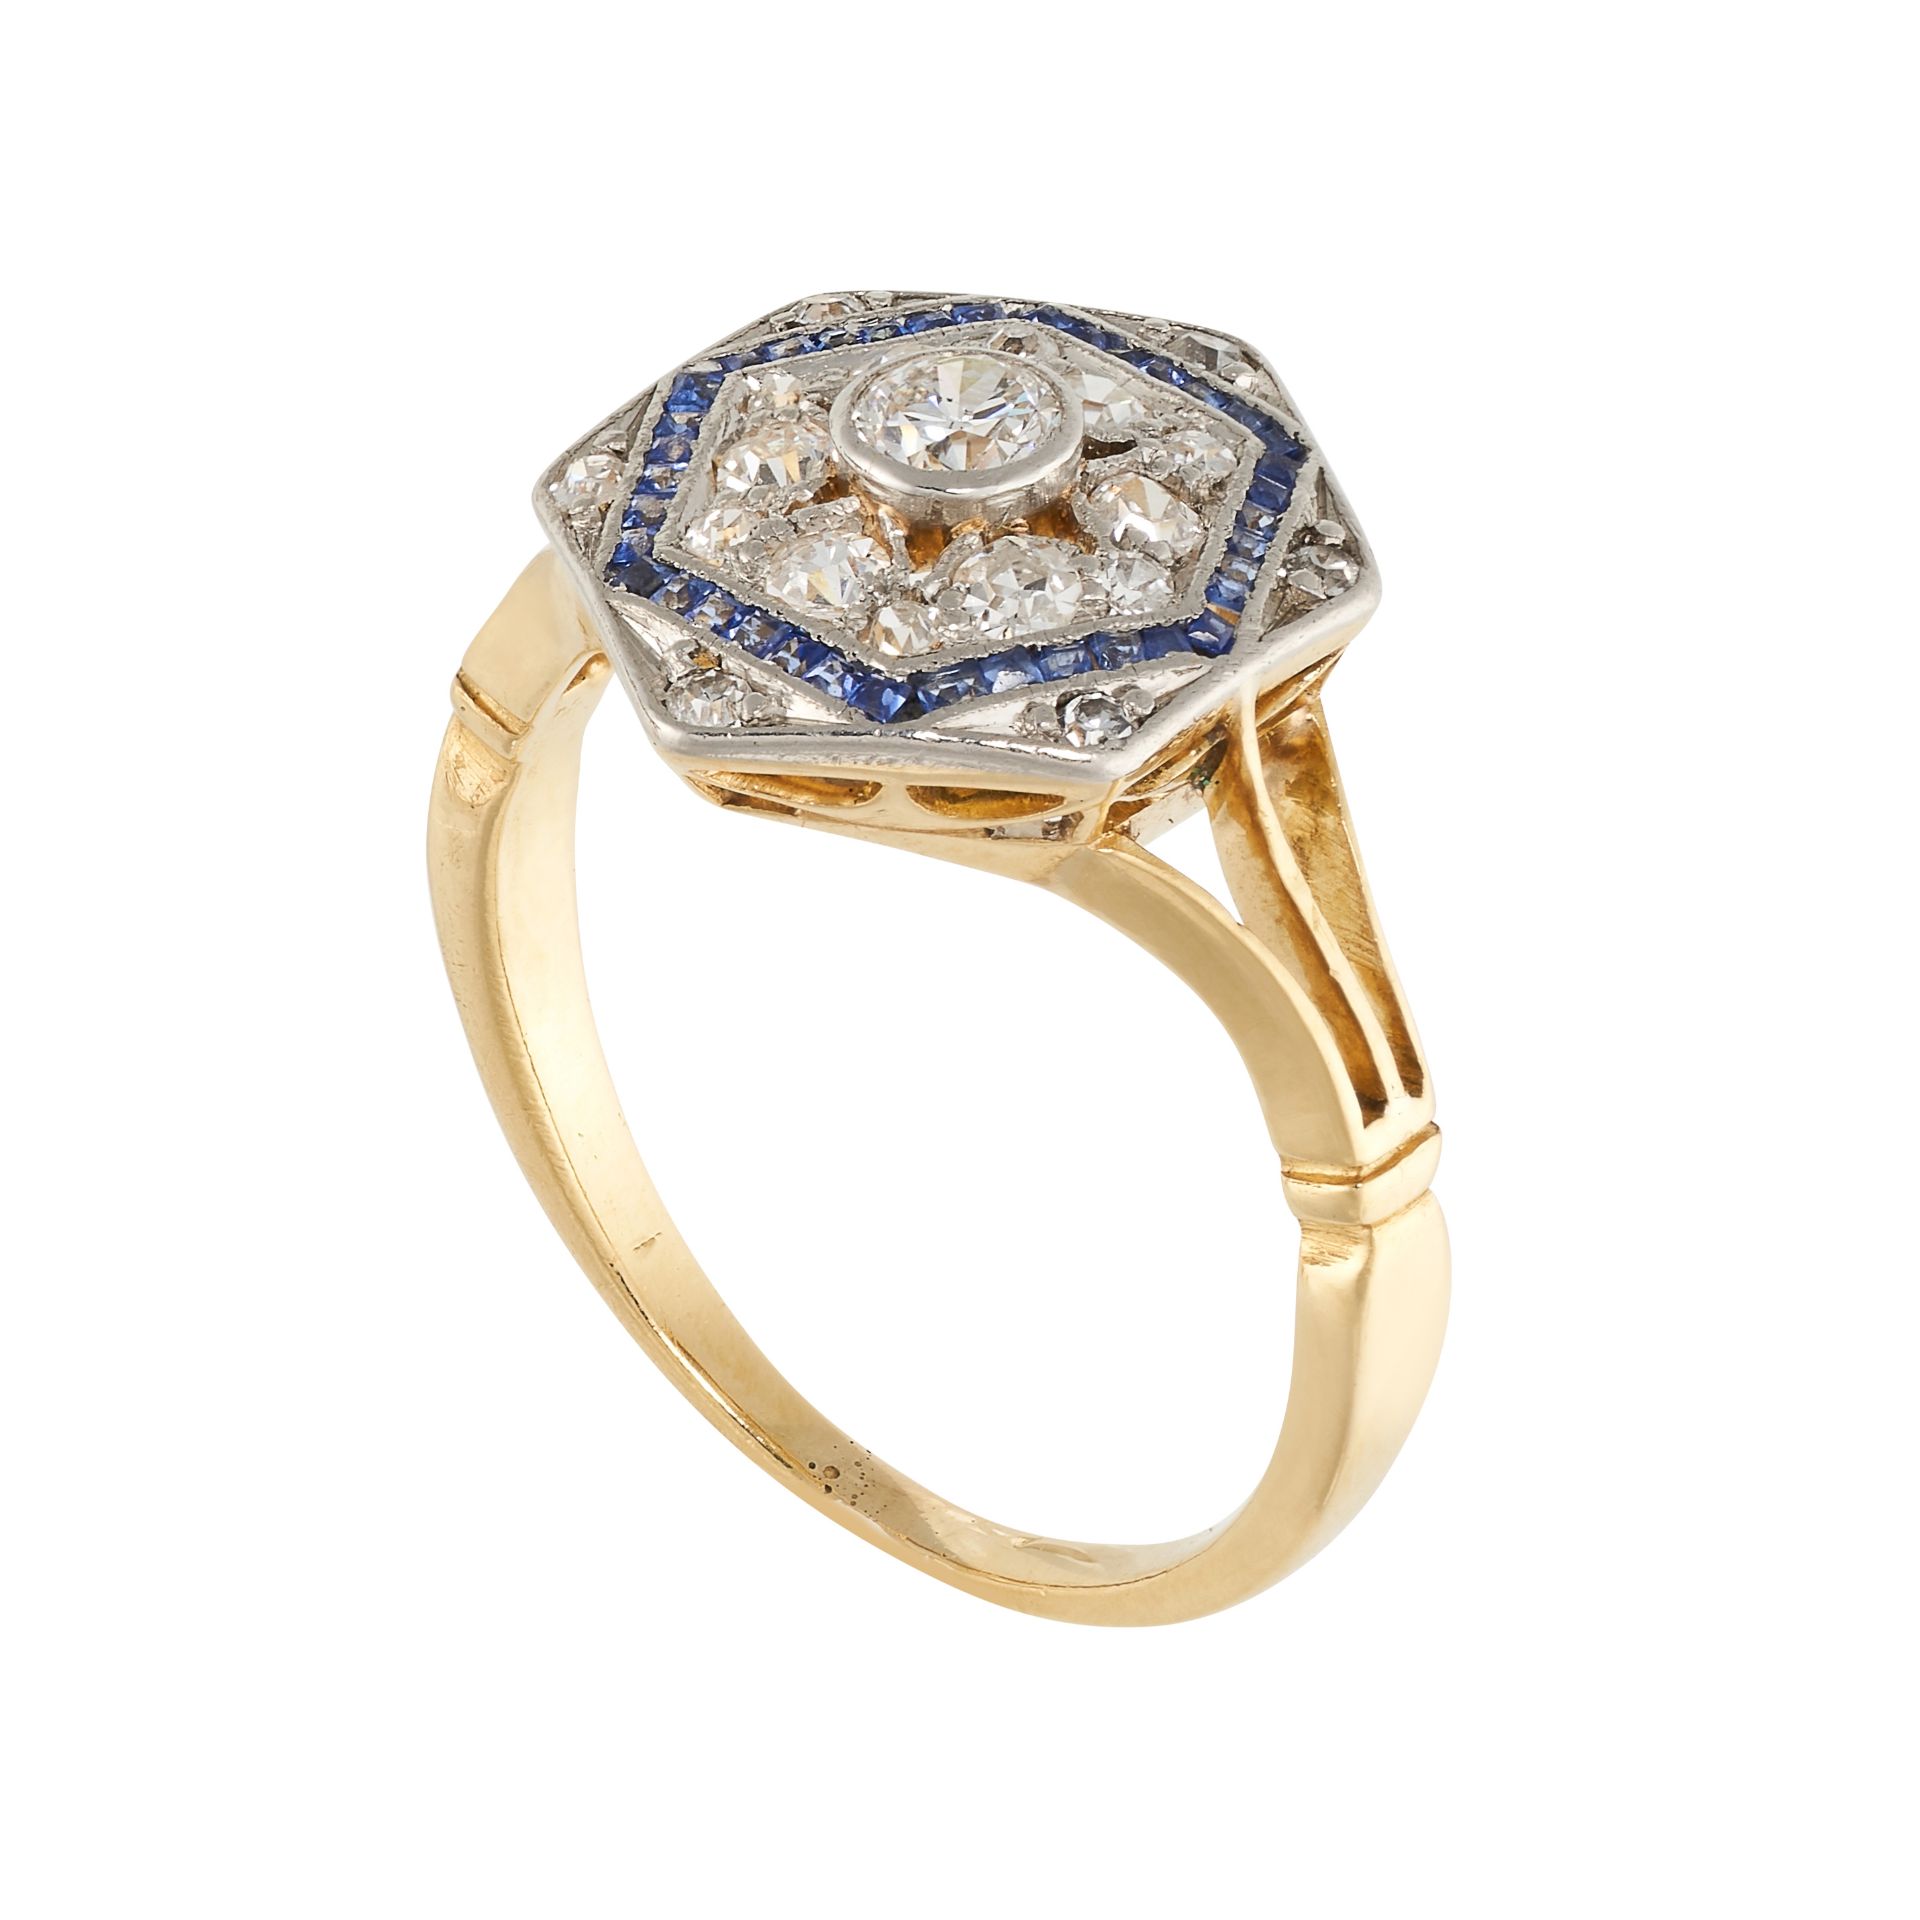 NO RESERVE - AN ART DECO DIAMOND AND SAPPHIRE RING in 18ct yellow gold and platinum, the hexagonal - Image 2 of 2